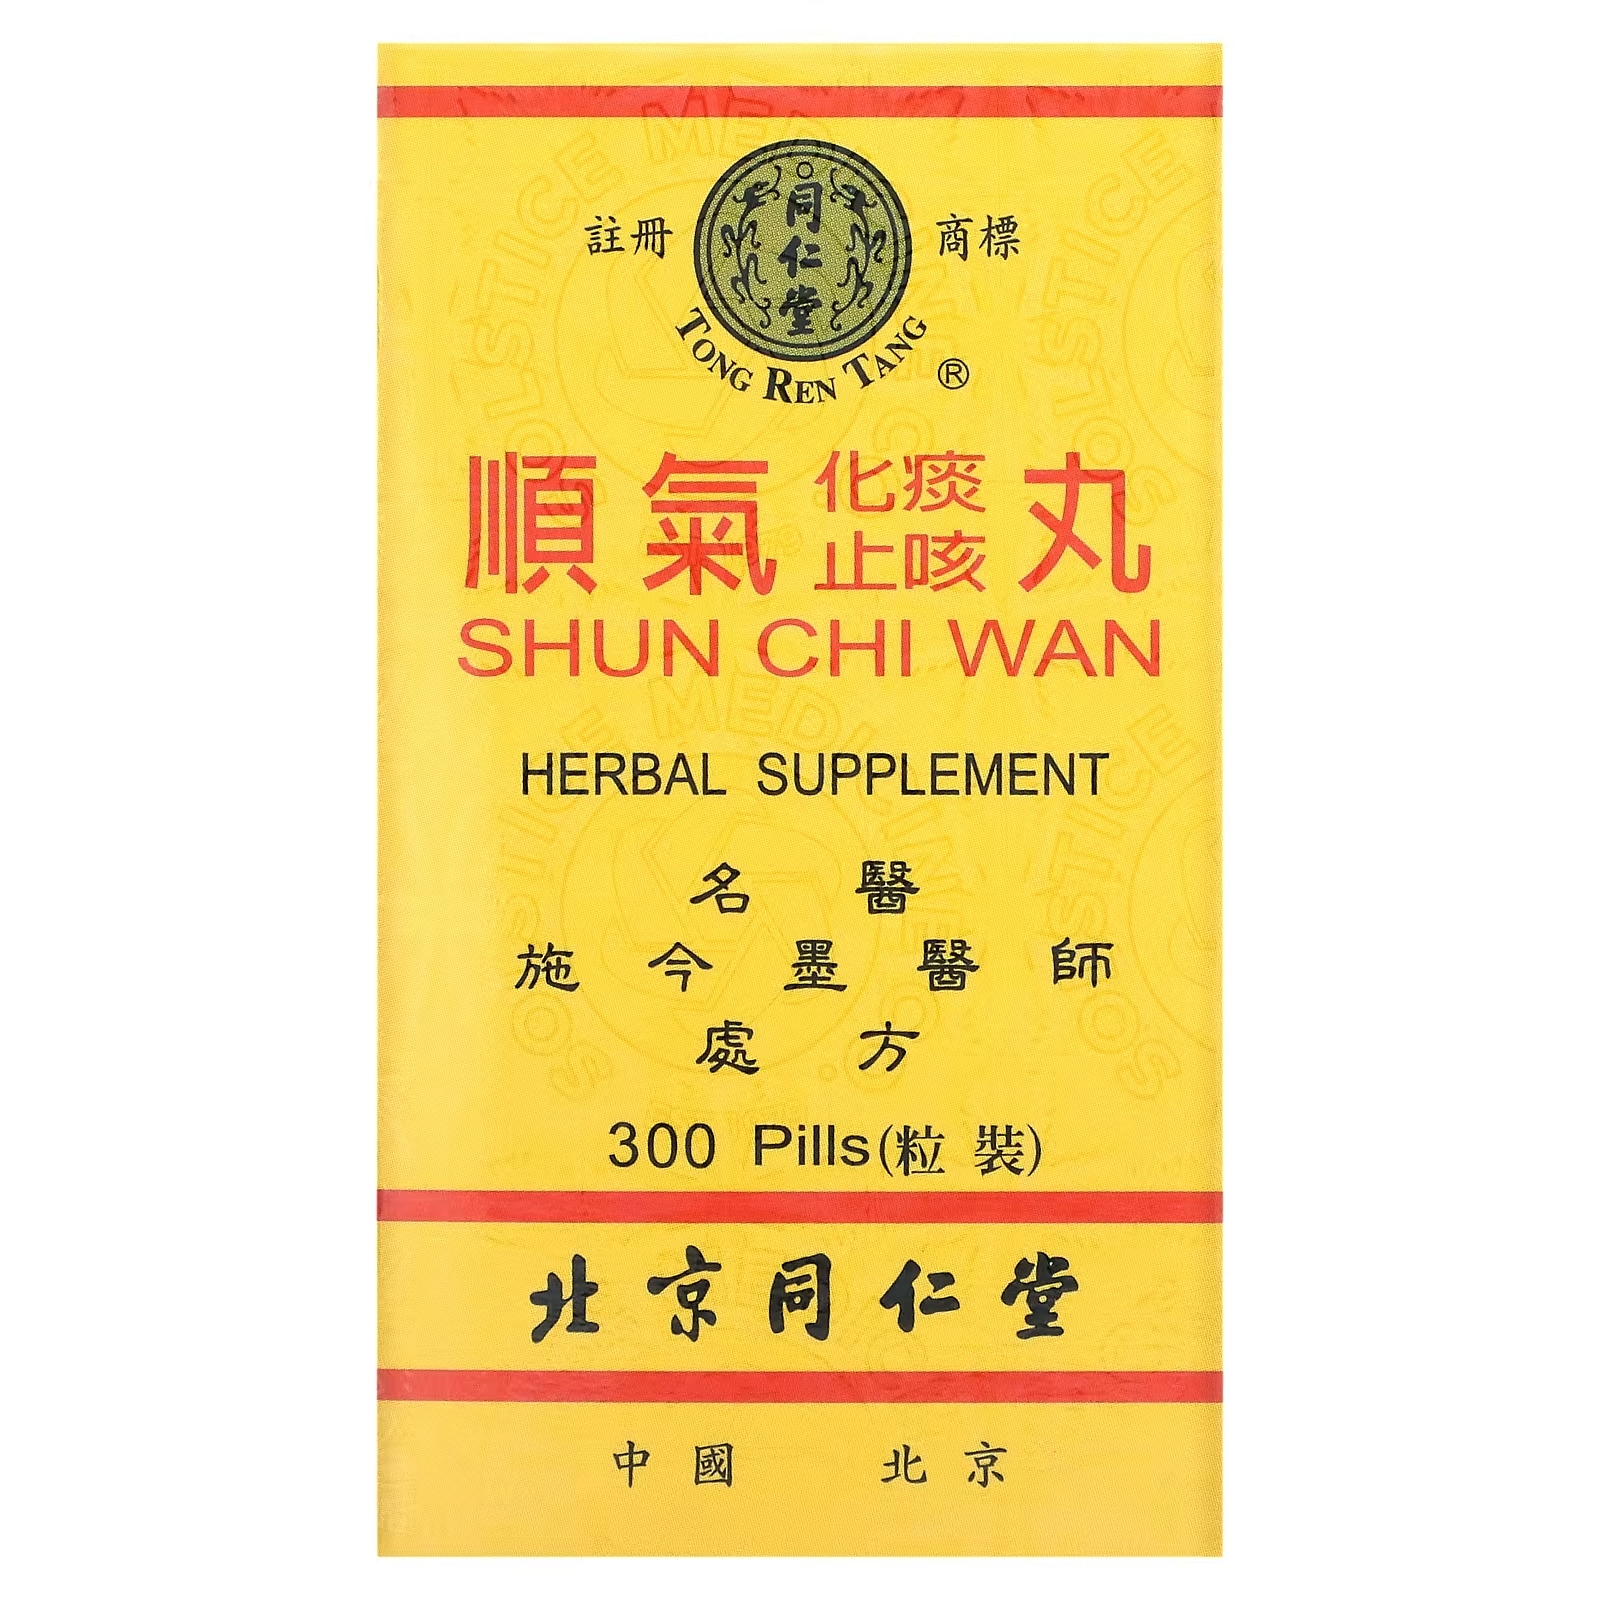 цена Tong Ren Tang Shun Chi Wan Supports the Health of the Nose Throat Larynx Trachea and Lungs, 300 таблеток